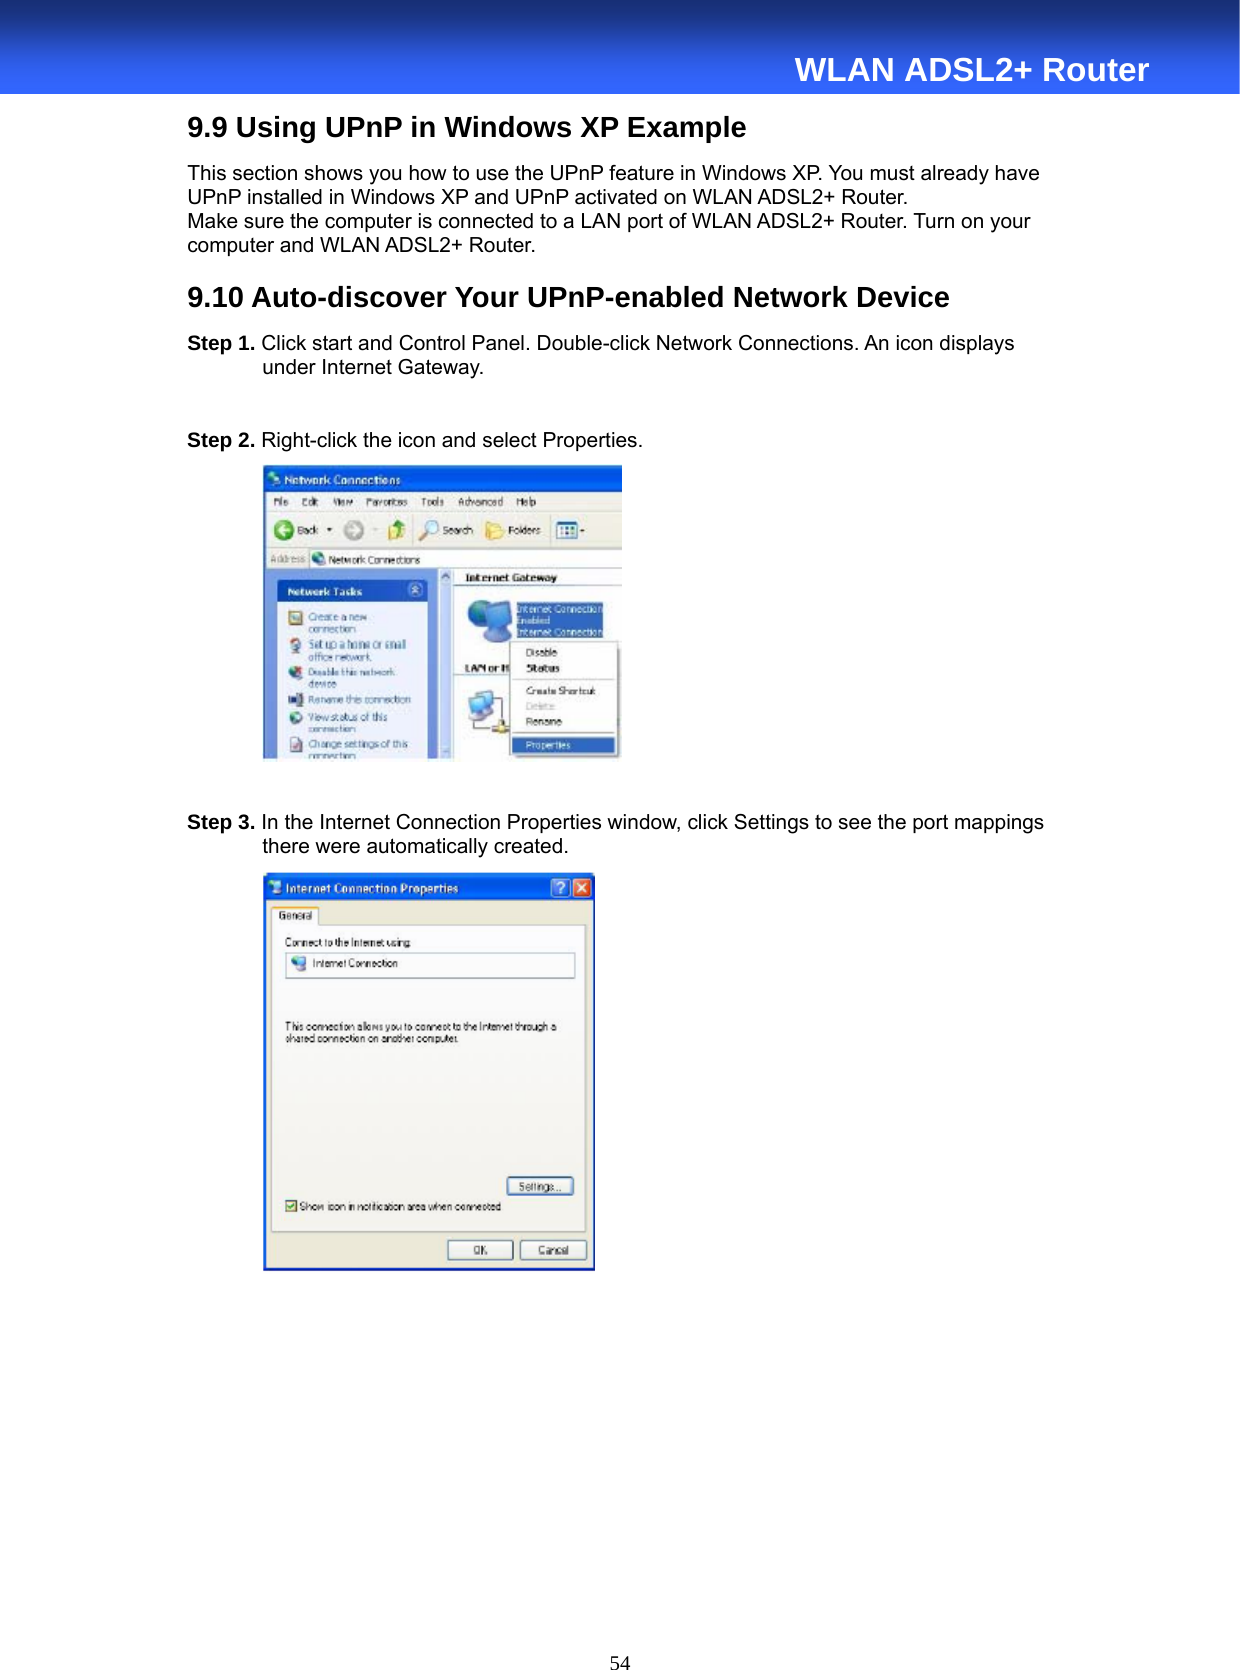  54  WLAN ADSL2+ Router 9.9 Using UPnP in Windows XP Example This section shows you how to use the UPnP feature in Windows XP. You must already have UPnP installed in Windows XP and UPnP activated on WLAN ADSL2+ Router. Make sure the computer is connected to a LAN port of WLAN ADSL2+ Router. Turn on your computer and WLAN ADSL2+ Router.  9.10 Auto-discover Your UPnP-enabled Network Device Step 1. Click start and Control Panel. Double-click Network Connections. An icon displays under Internet Gateway.  Step 2. Right-click the icon and select Properties.     Step 3. In the Internet Connection Properties window, click Settings to see the port mappings there were automatically created.          